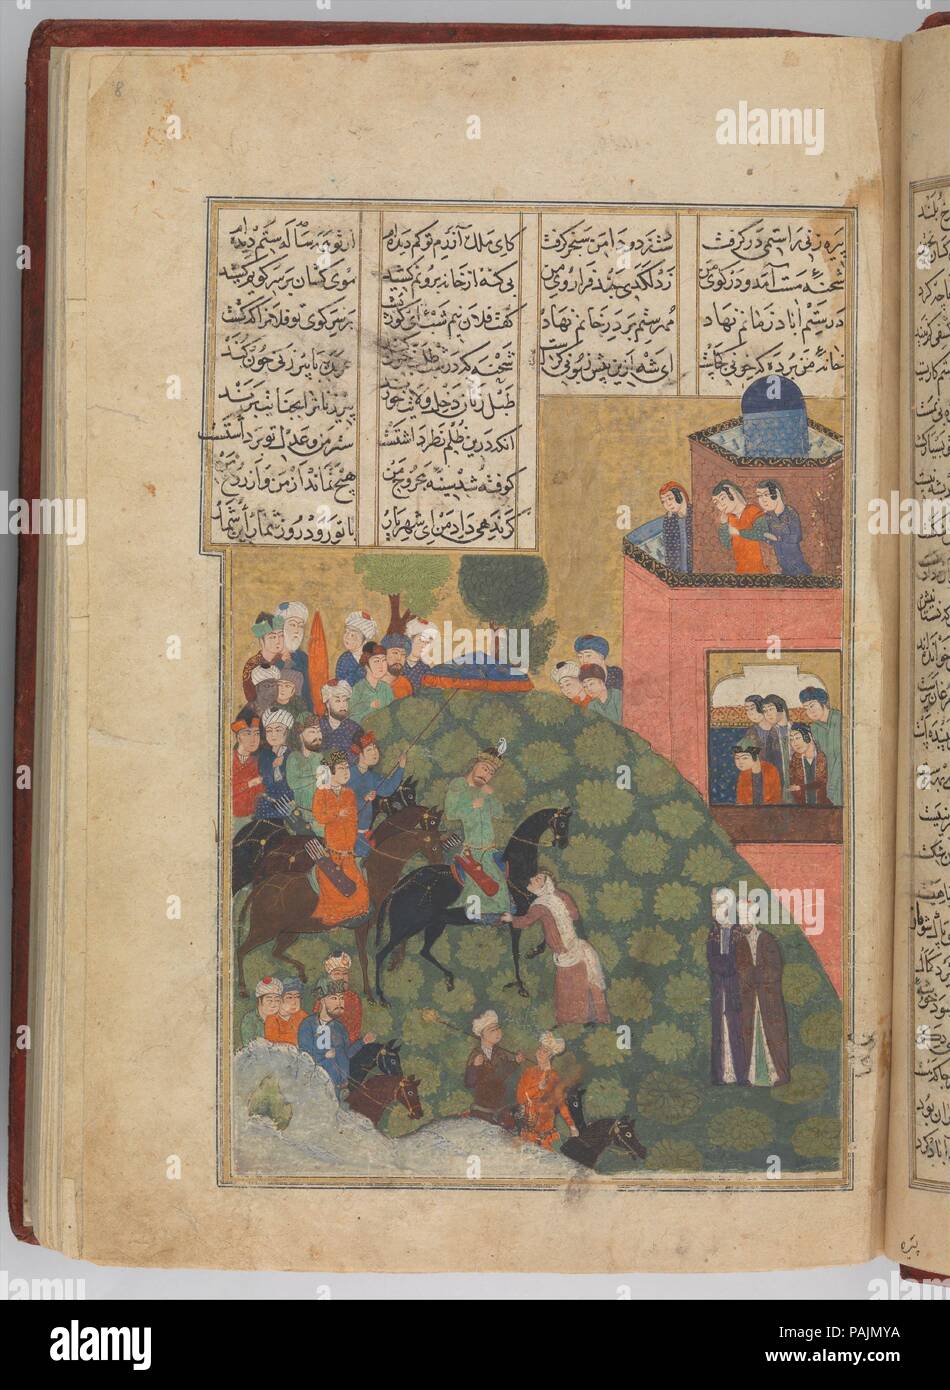 Khamsa (Quintet) of Nizami. Author: Nizami (Ilyas Abu Muhammad Nizam al-Din of Ganja) (probably 1141-1217). Dimensions: H. 11 1/2 in. (29.2 cm)  W. 8in. (20.3cm). Date: 15th century.  By the end of the fifteenth century, manuscripts of Persian poetry typically were written in a script known as nasta'liq, an elegant, flowing form of calligraphy. This manuscript is somewhat unusual in its archaizing use of the more rectilinear naskh script. Nevertheless, the paintings of this manuscript are stylistically akin to those found in manuscripts produced in Shiraz during the reign of Sultan Khalil Aq Q Stock Photo